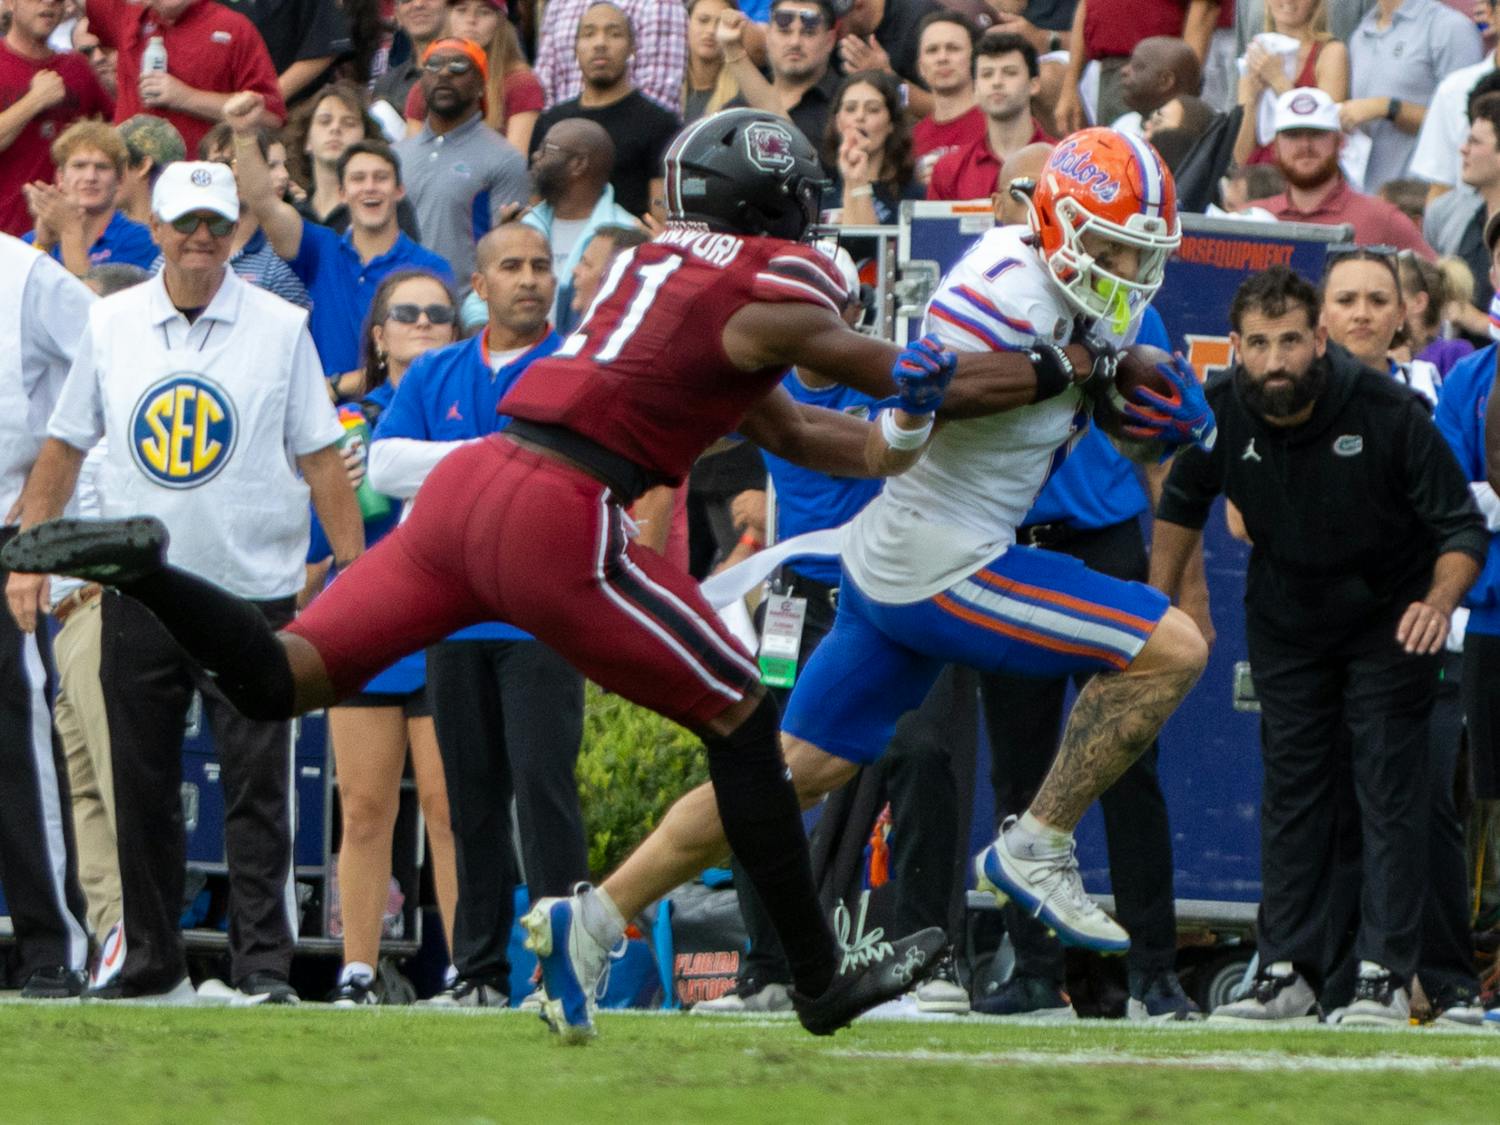 Senior wide receiver Ricky Pearsall runs past a South Carolina defender in Florida's 41-39 win against the South Carolina Gamecocks on Saturday, Oc.t 14, 2023.